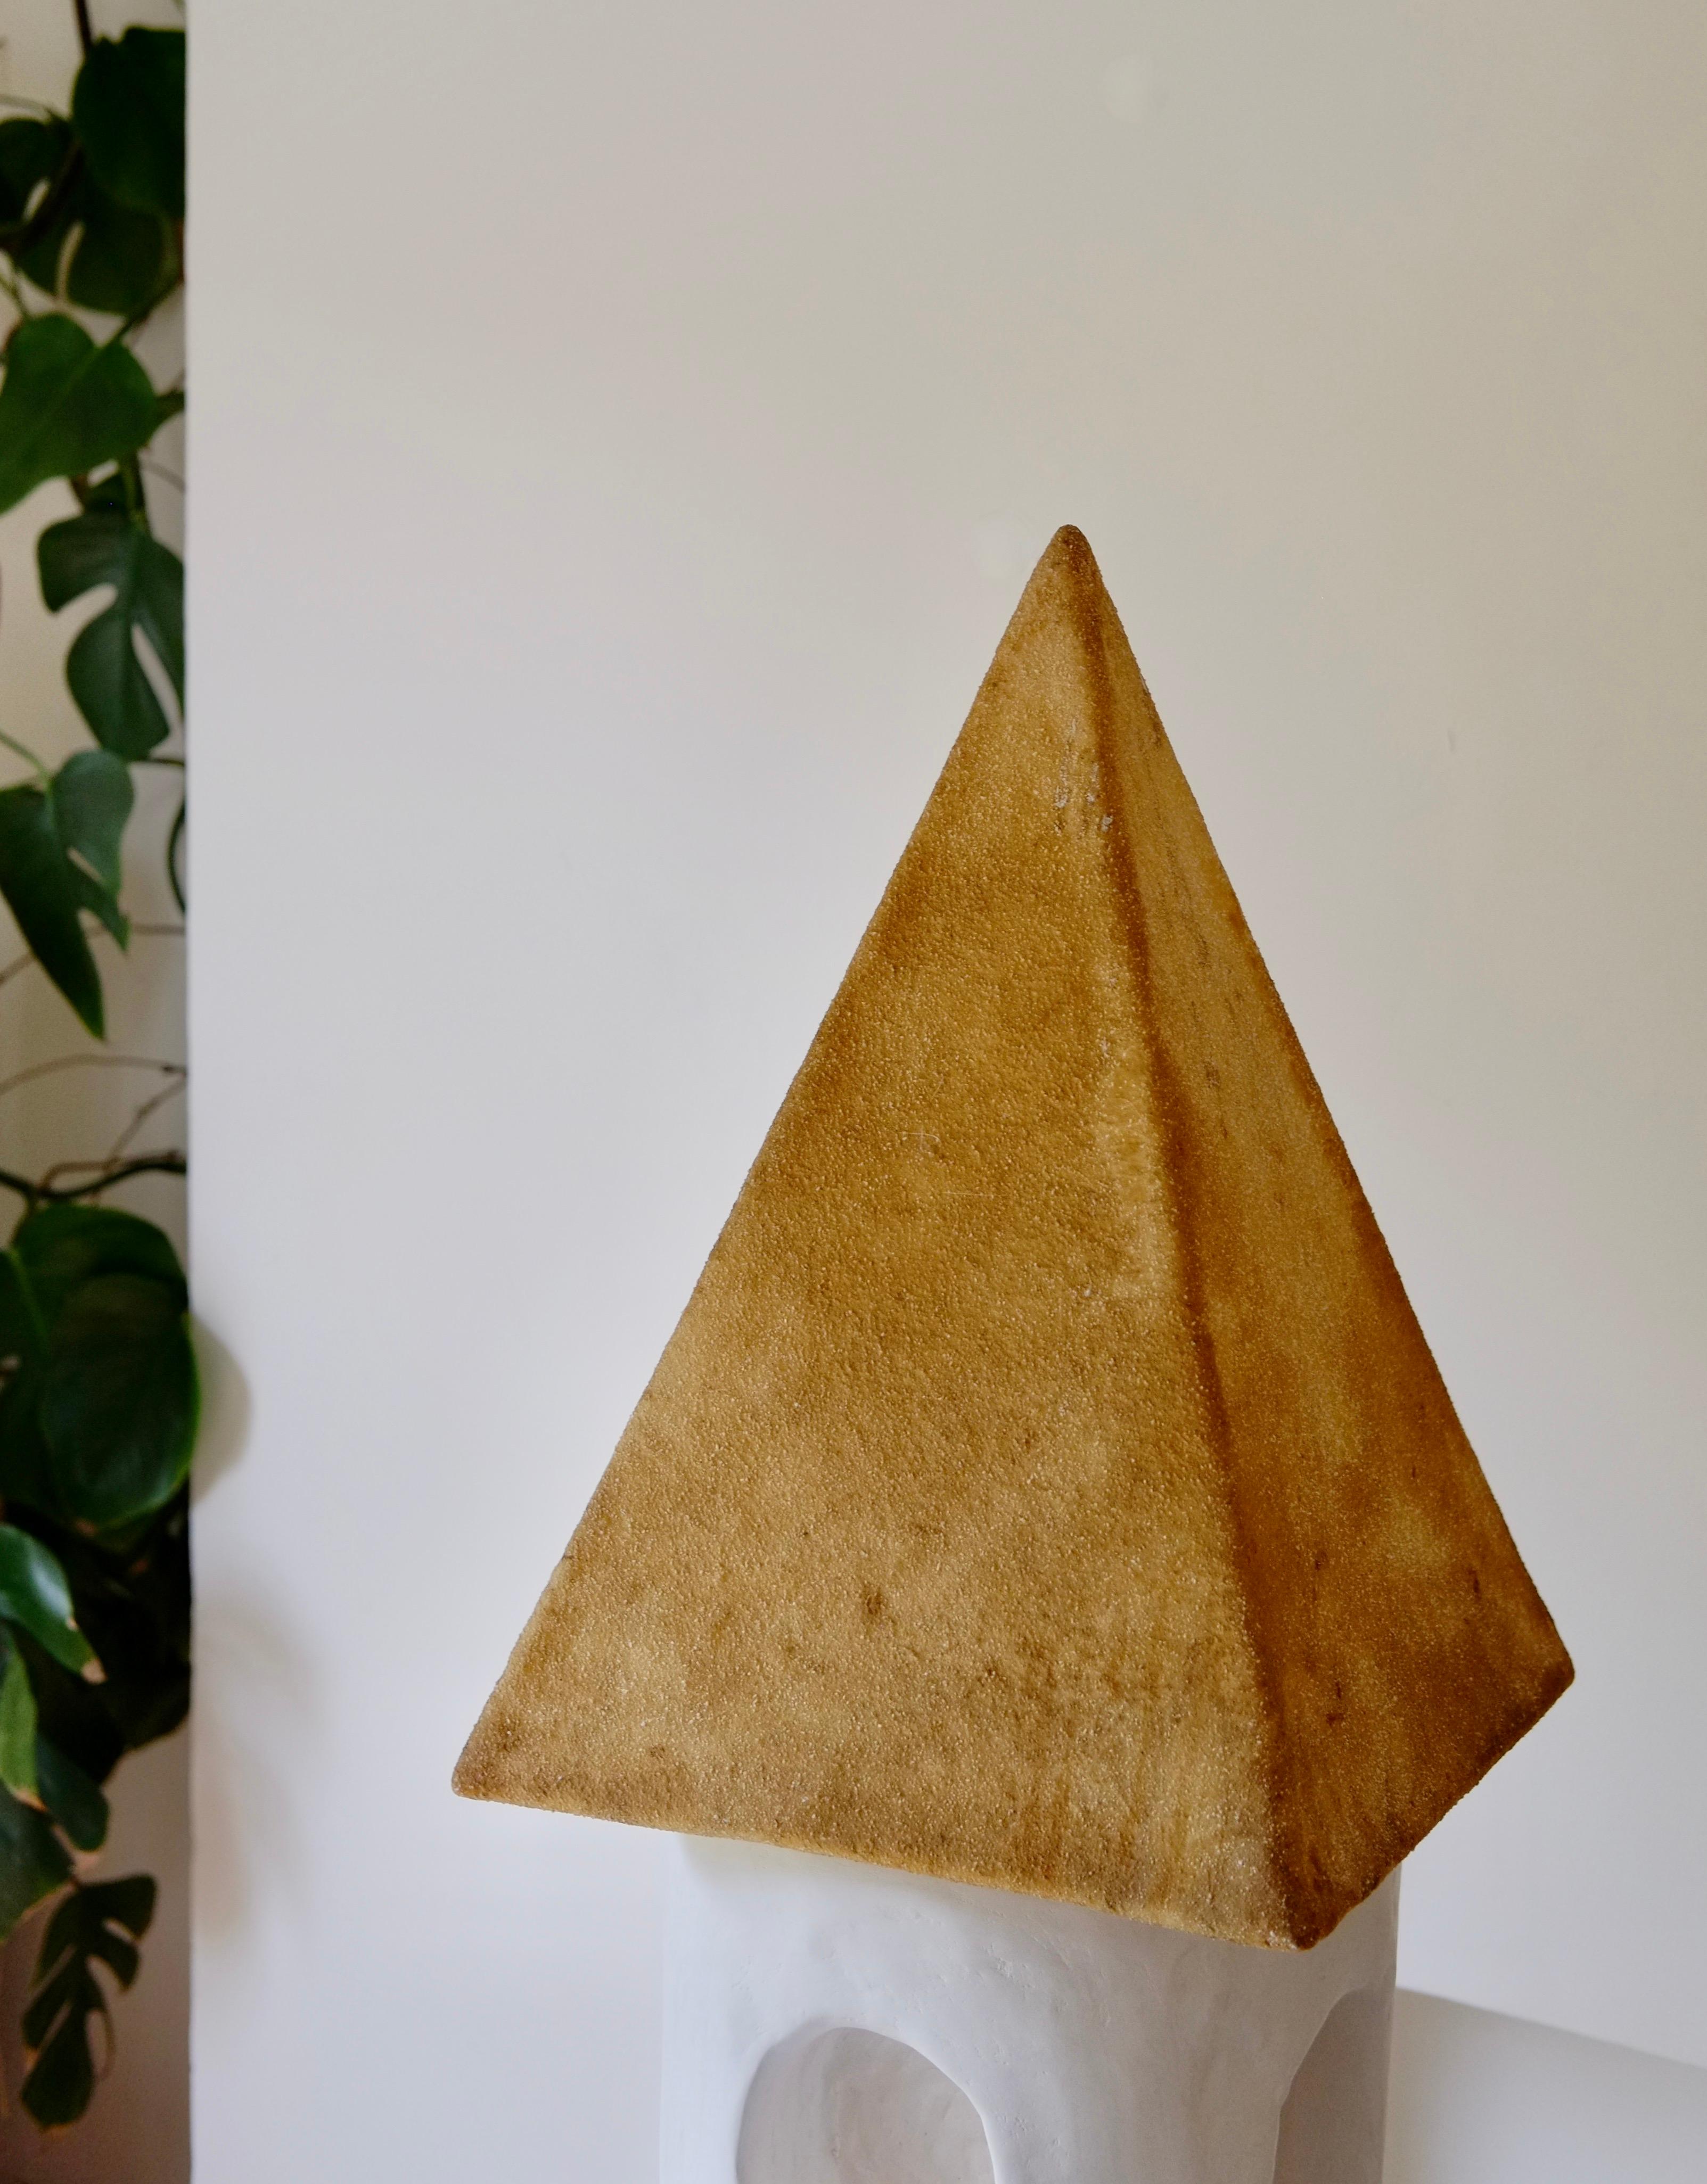 A large pyramid lamp designed by Andre Cazenave for Italian company Singleton in the 1970's. Famous for his common rock lamps it is very rare to come across this pyramid model.

Made from fibreglass the lamp is in very good vintage condition with